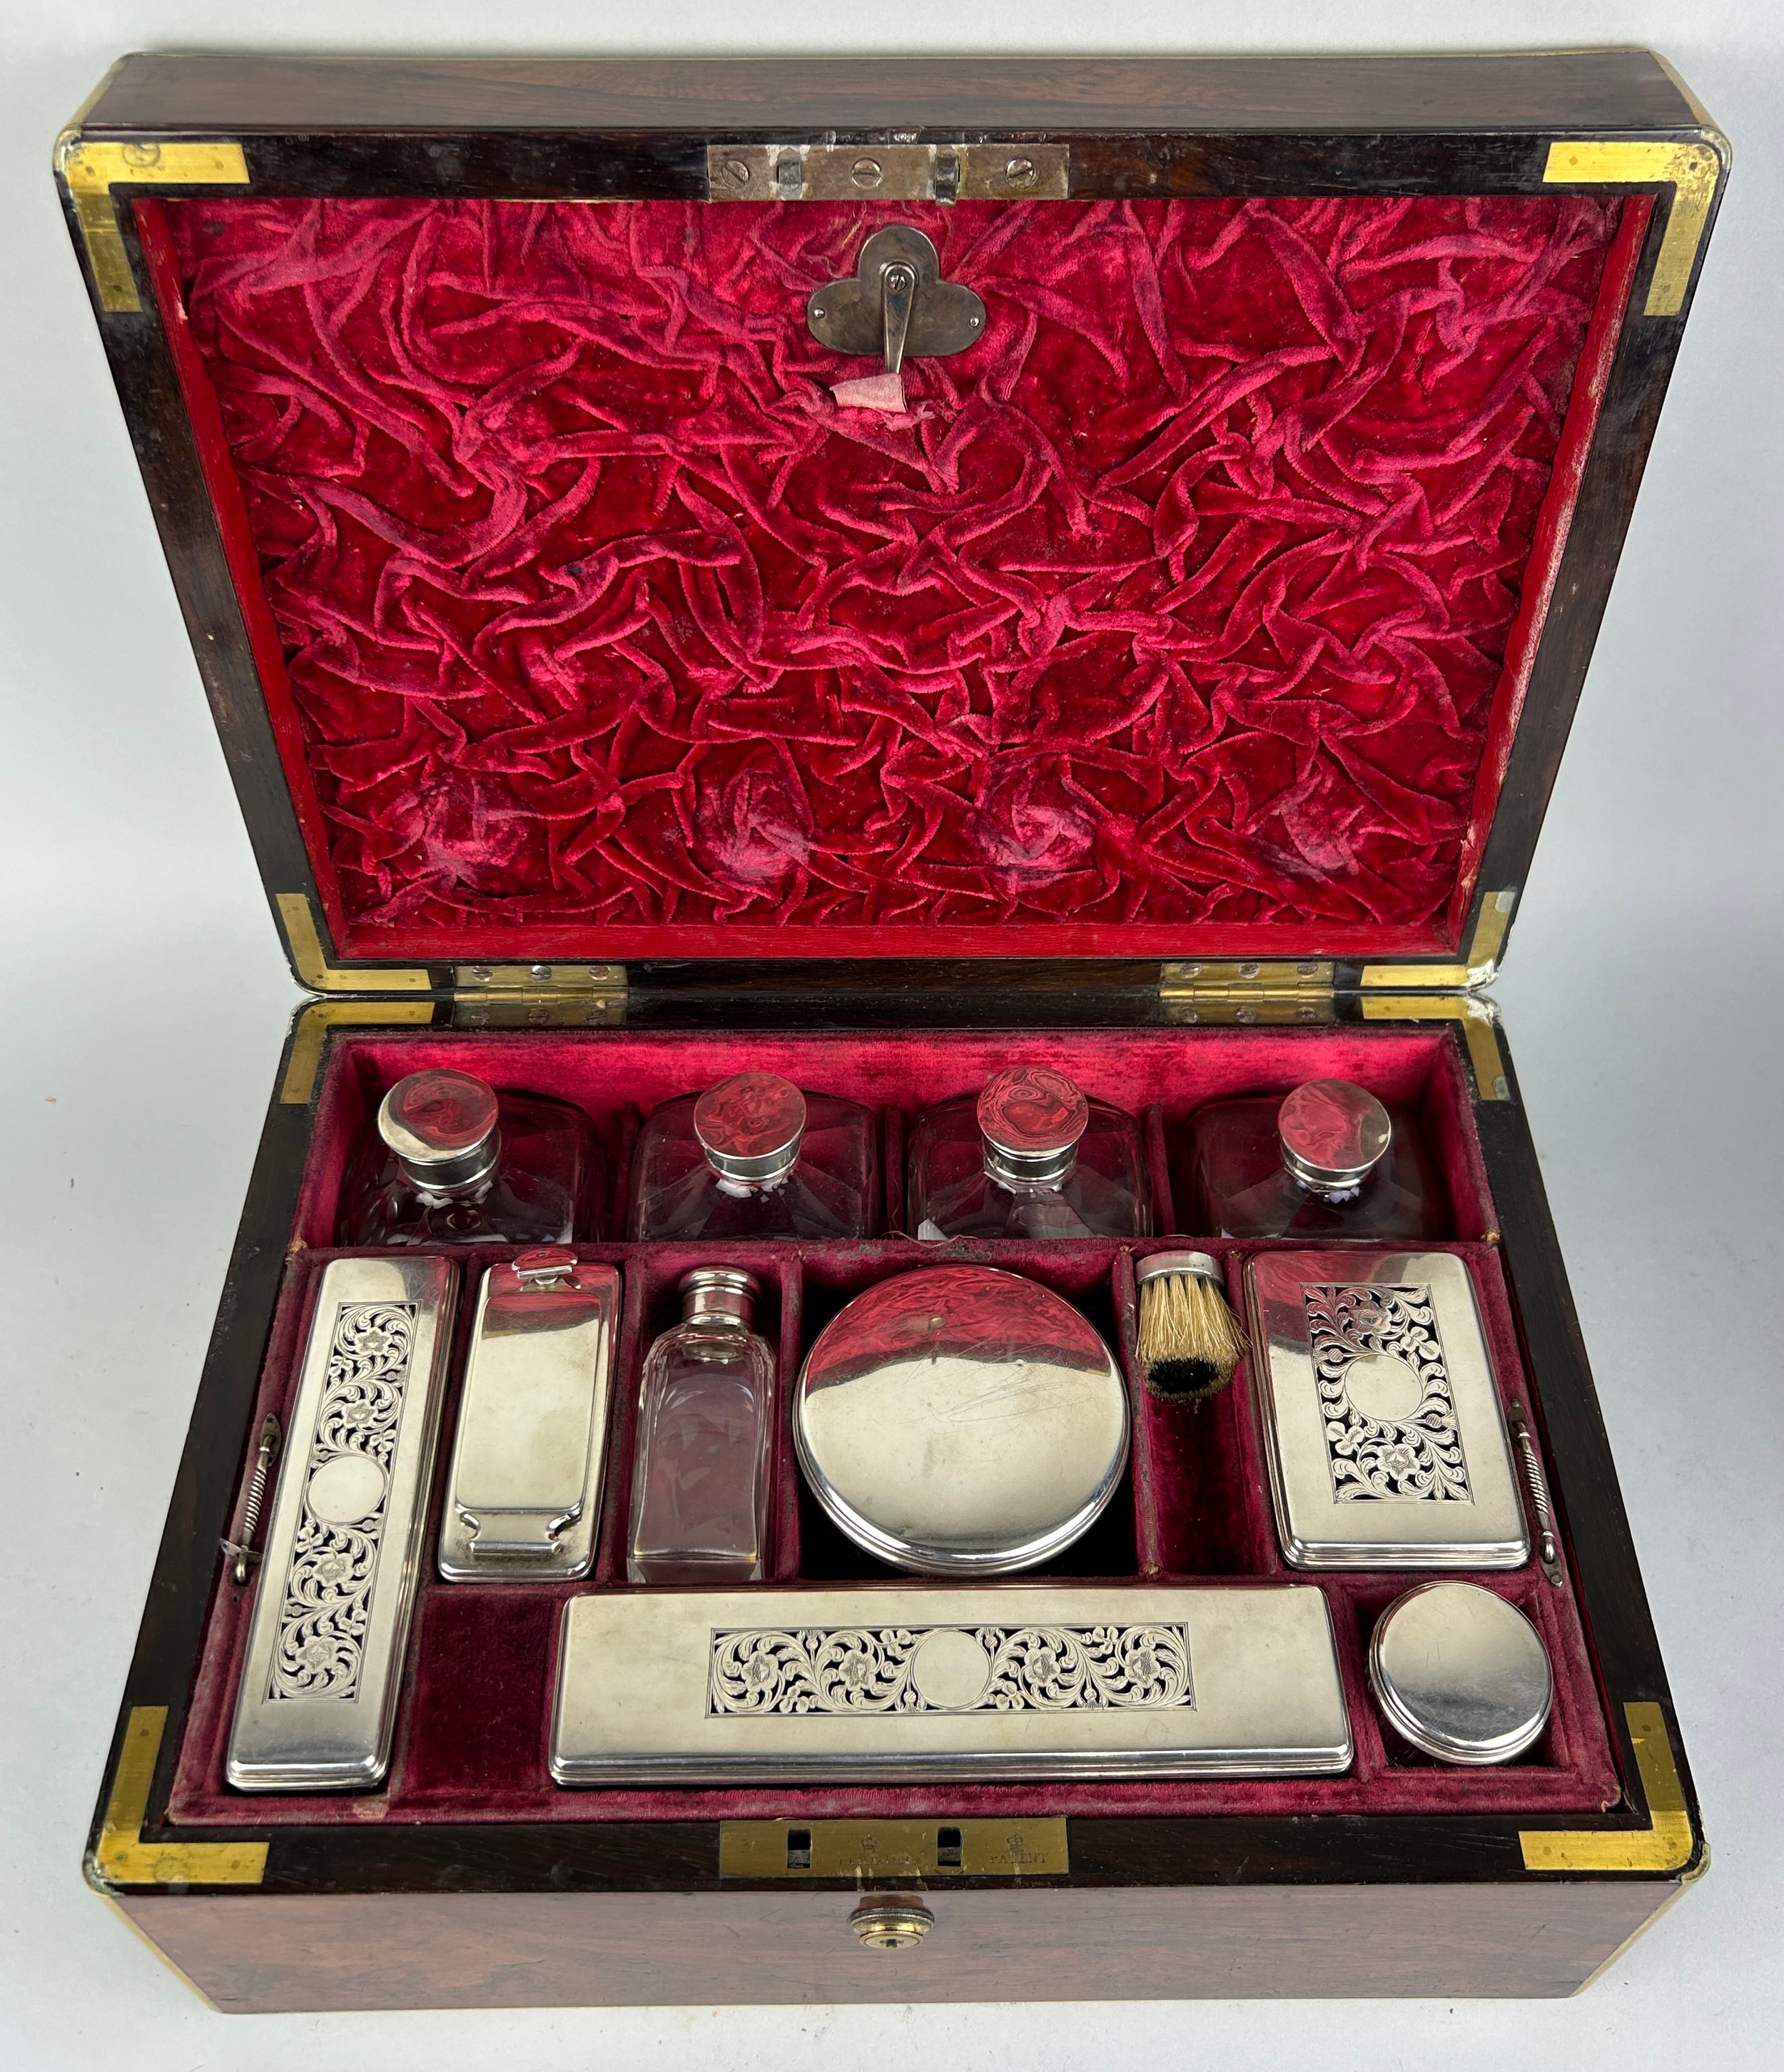 A 19TH CENTURY SILVER VANITY SET IN A CAMPAIGN BOX WITH BRASS HANDLES, 35cm x 25cm x 15cm